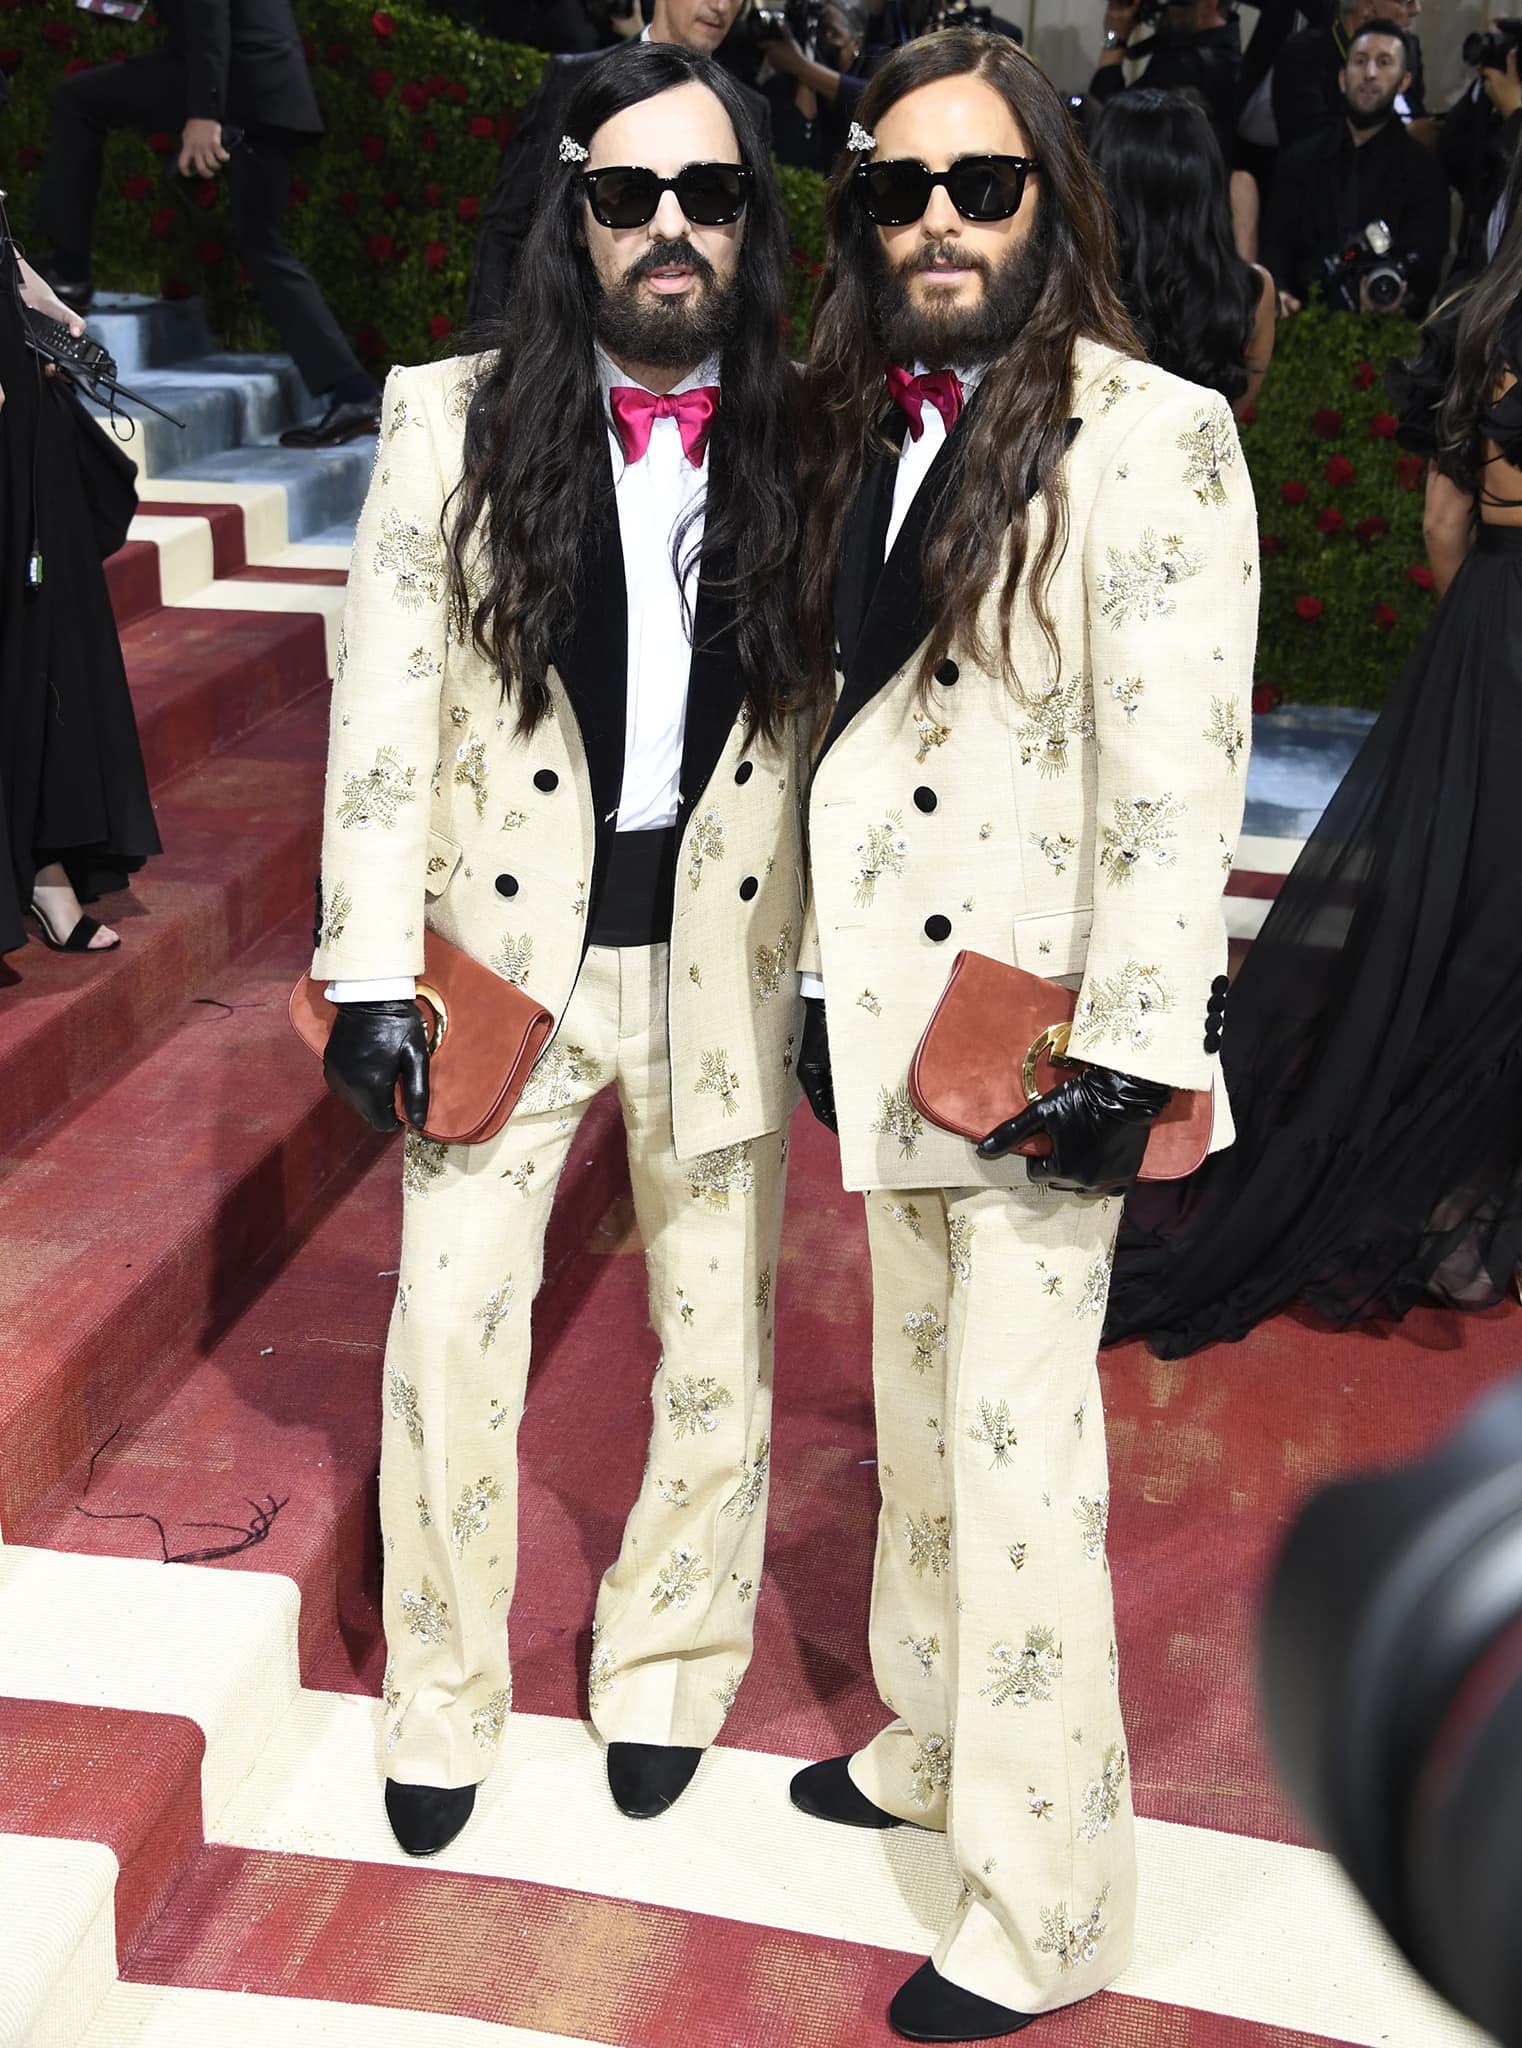 Alessandro Michele and Jared Leto take their twinning look to the next level with matching long, wavy hairstyles and facial hair